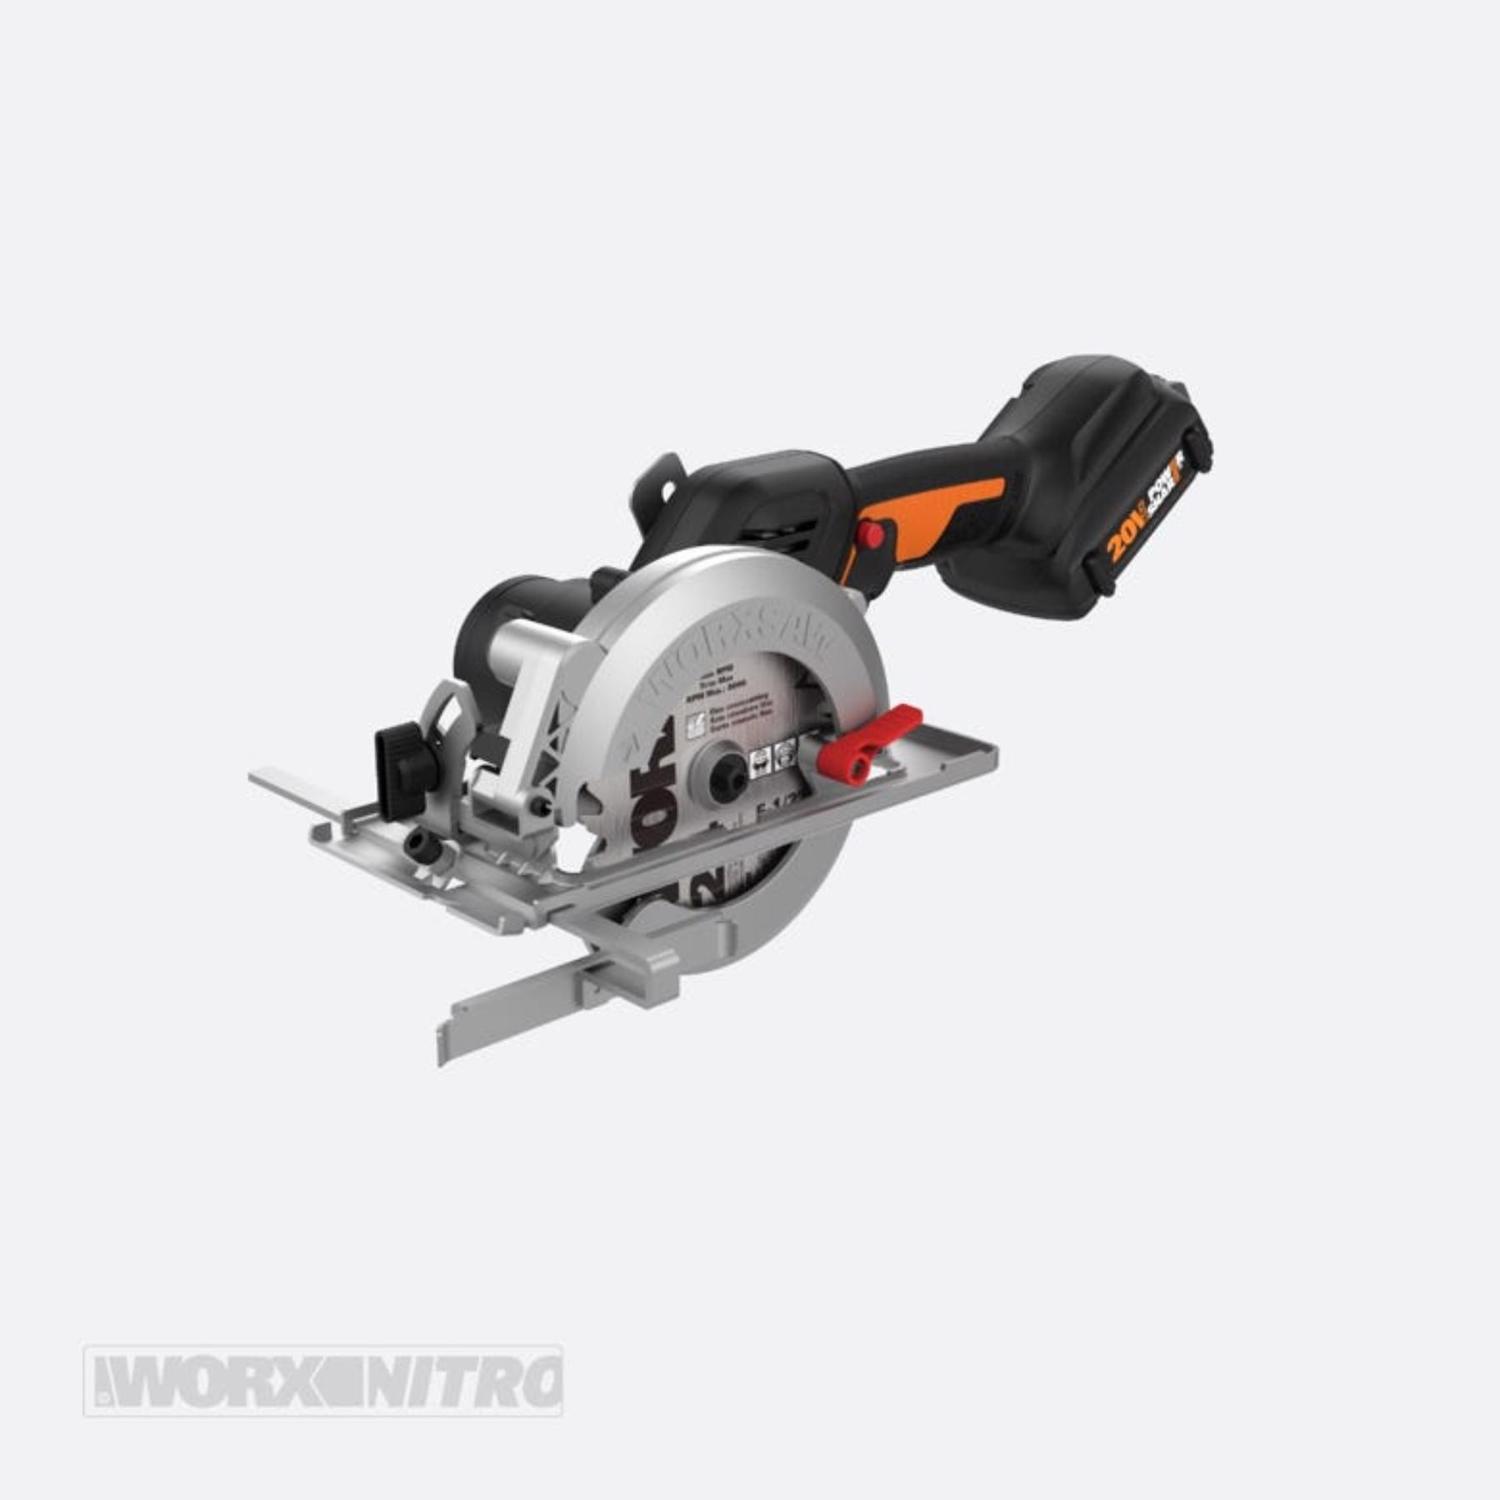 Photos - Power Saw Worx 20V MAX 4-1/2 in. Cordless Brushless Compact Circular Saw WX531L 